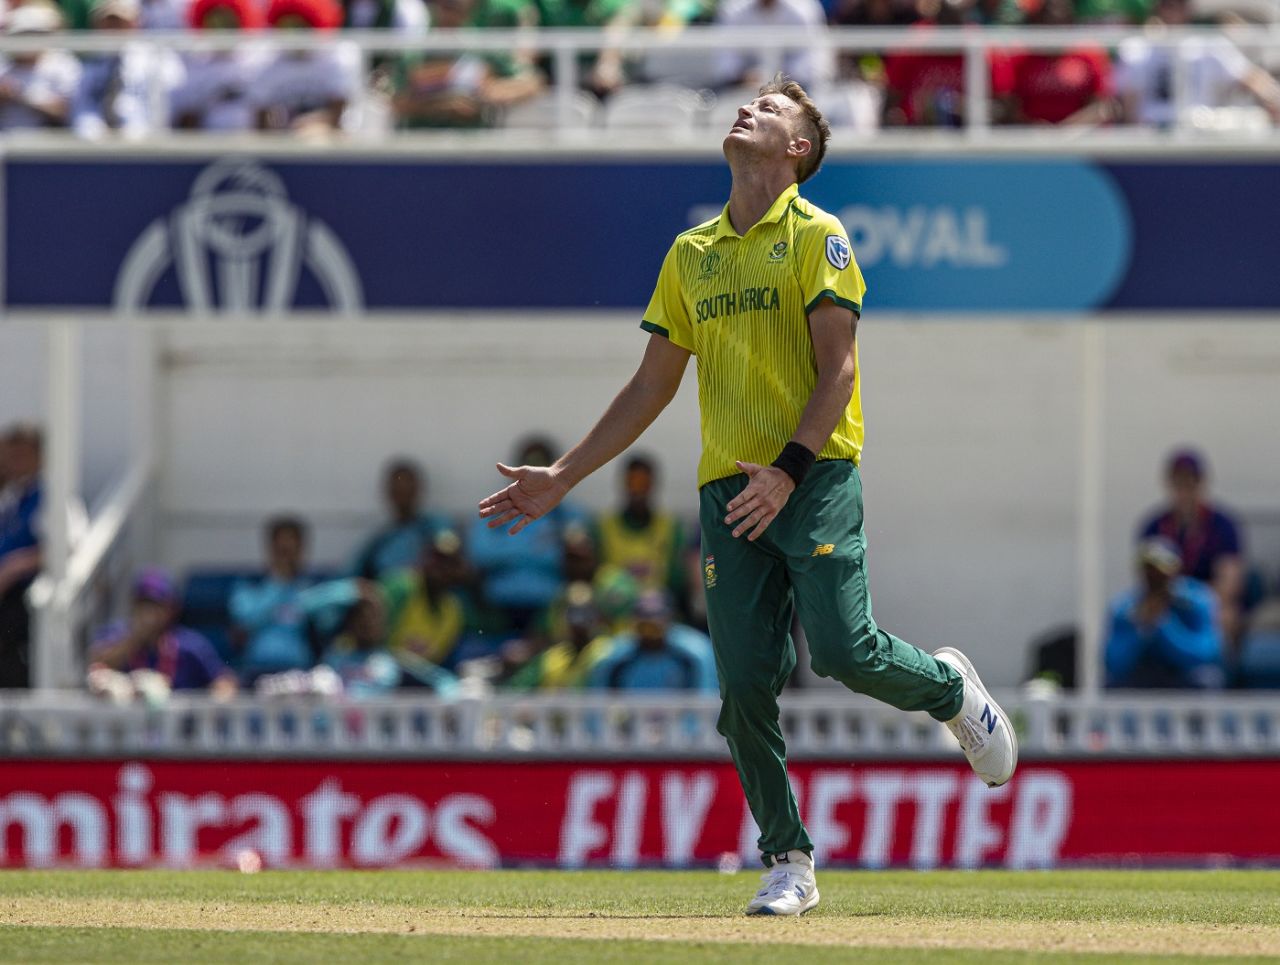 Chris Morris of South Africa despairs after conceding four runs, Bangladesh v South Africa, World Cup 2019, The Oval, June 2, 2019